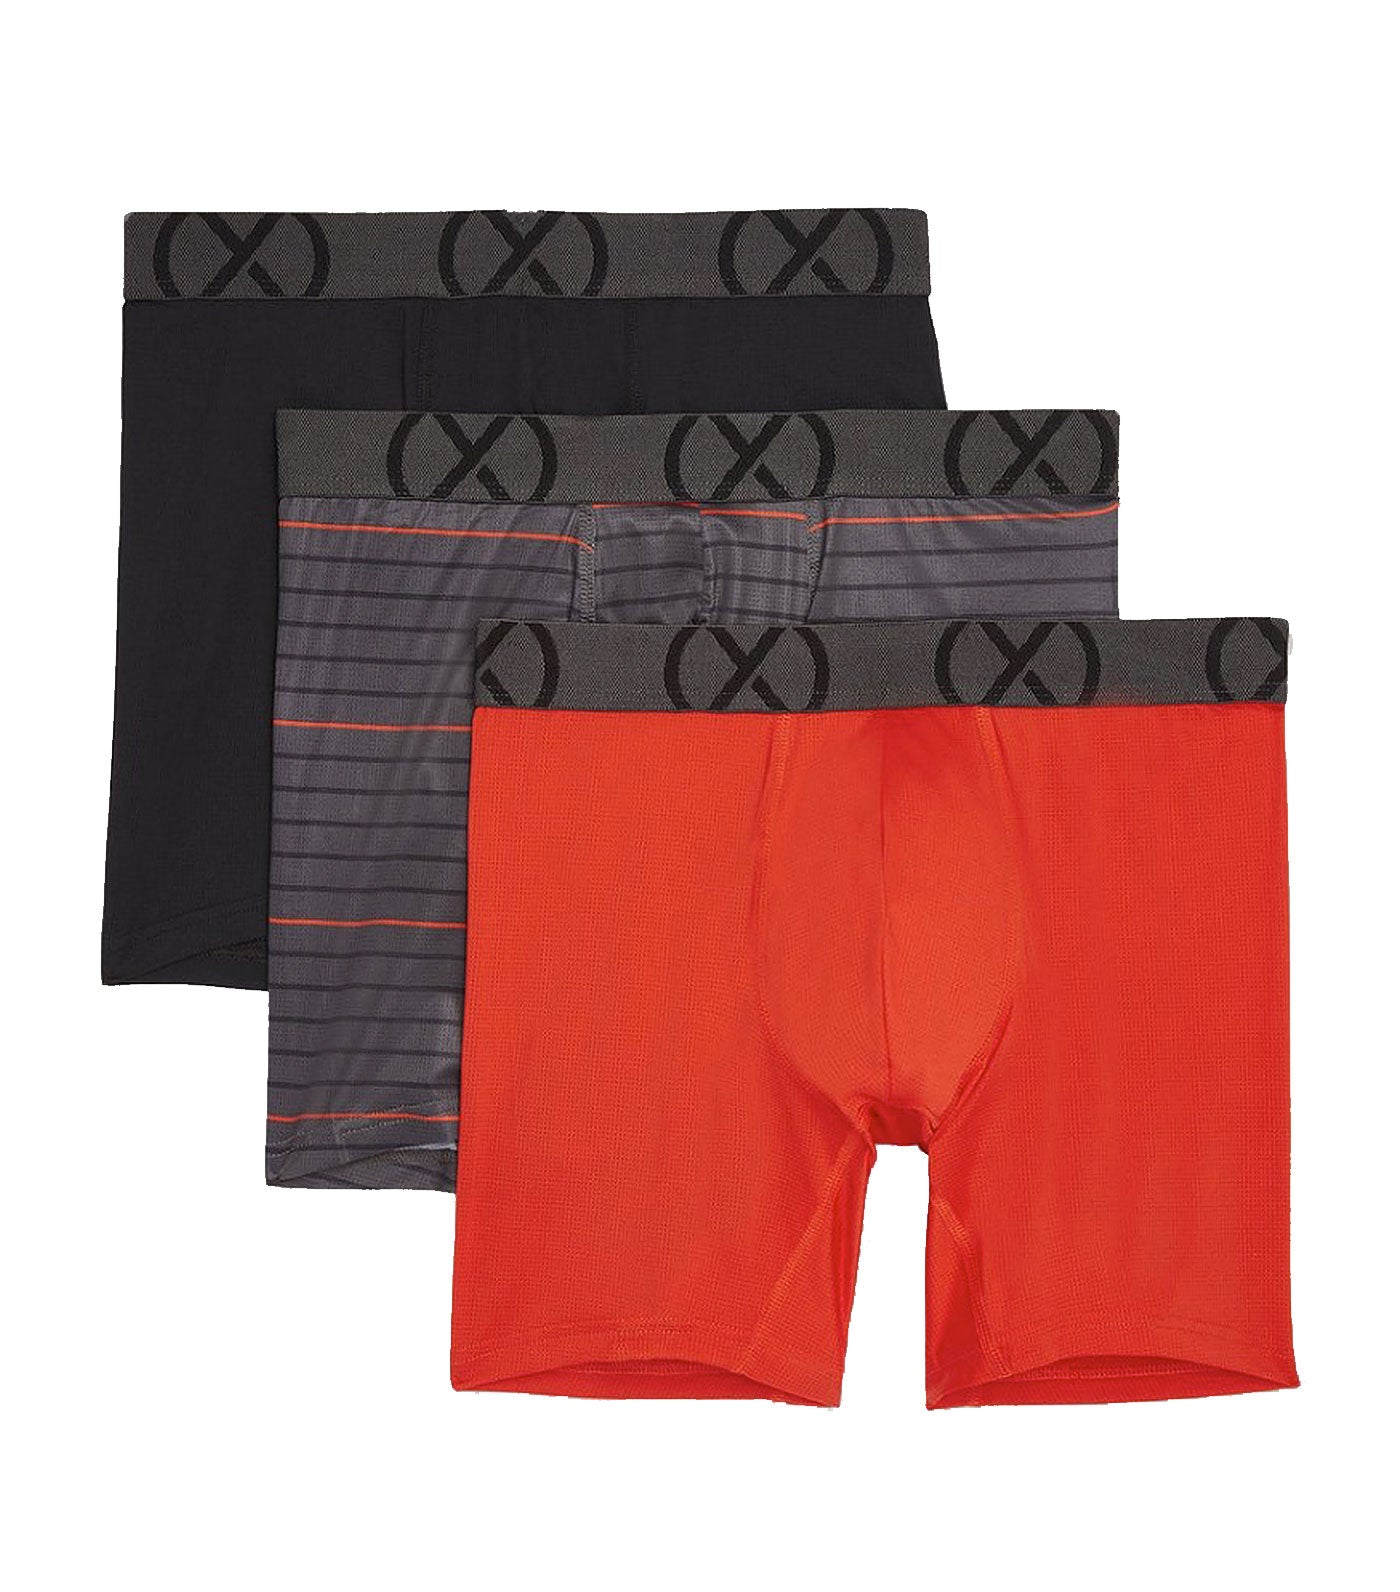 Three-Pack (X) Sport Mesh Boxer Briefs with 6in Inseam in Multicolor Red